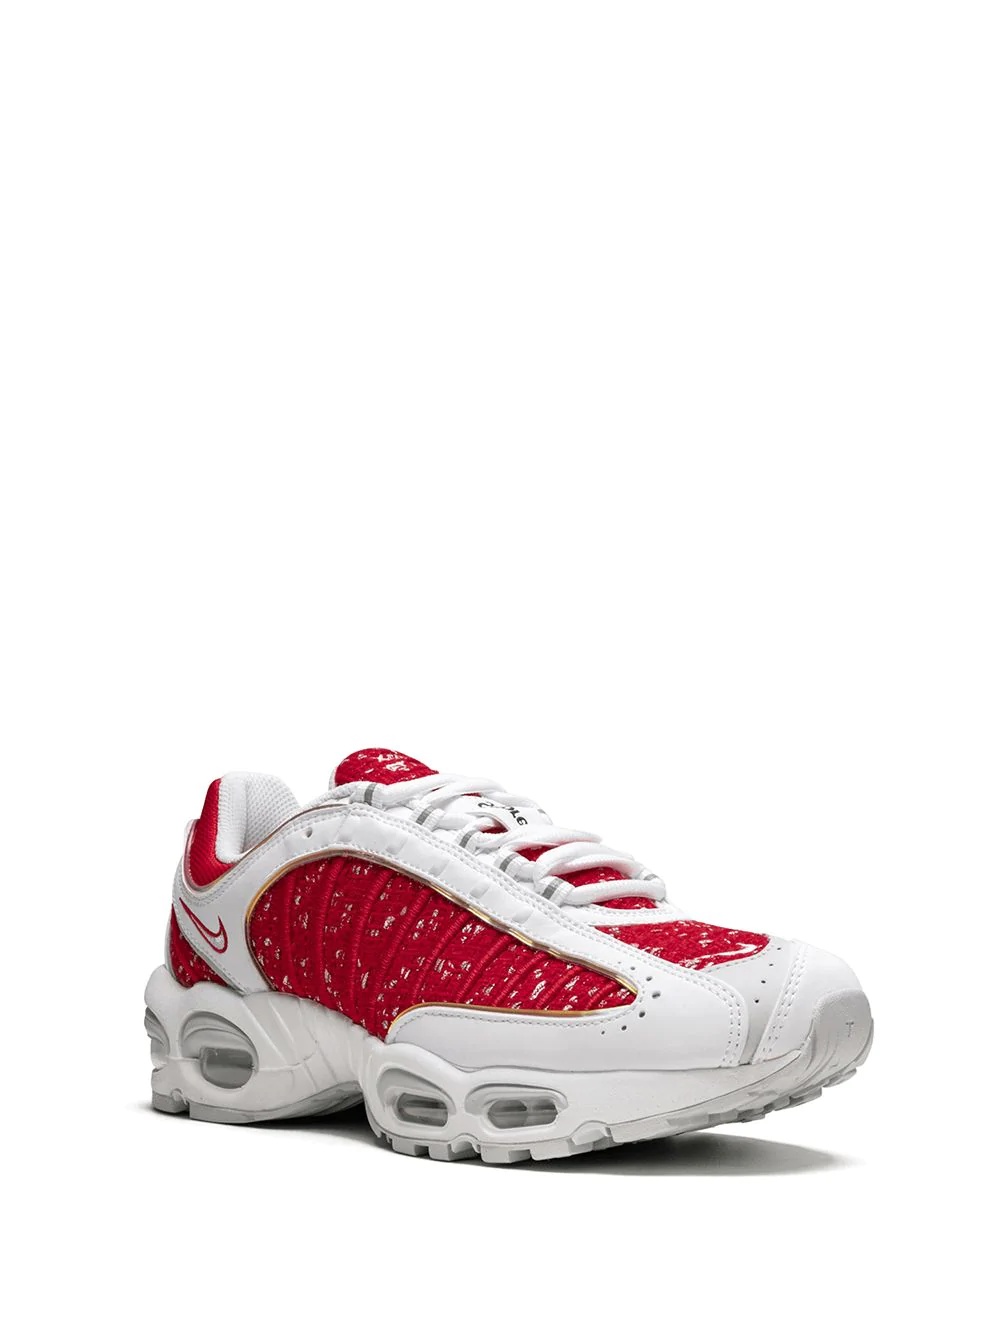 x Supreme Air Max Tailwind 4 sneakers - 2